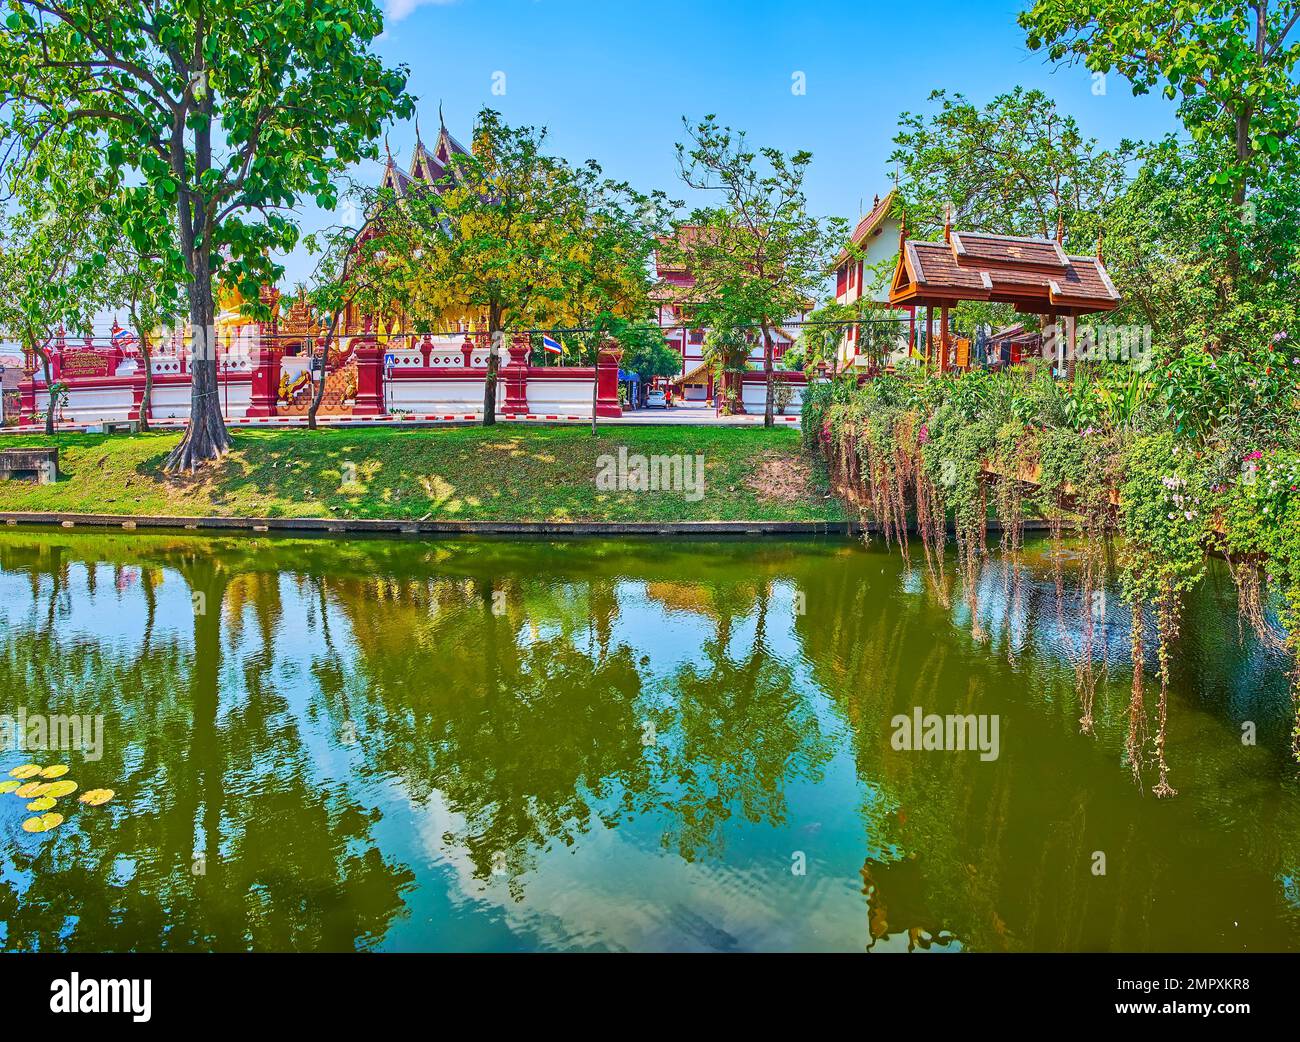 The lush hanging plants decorate the wooden footbridge across the Old City Moat, Chiang Mai, Thailand Stock Photo